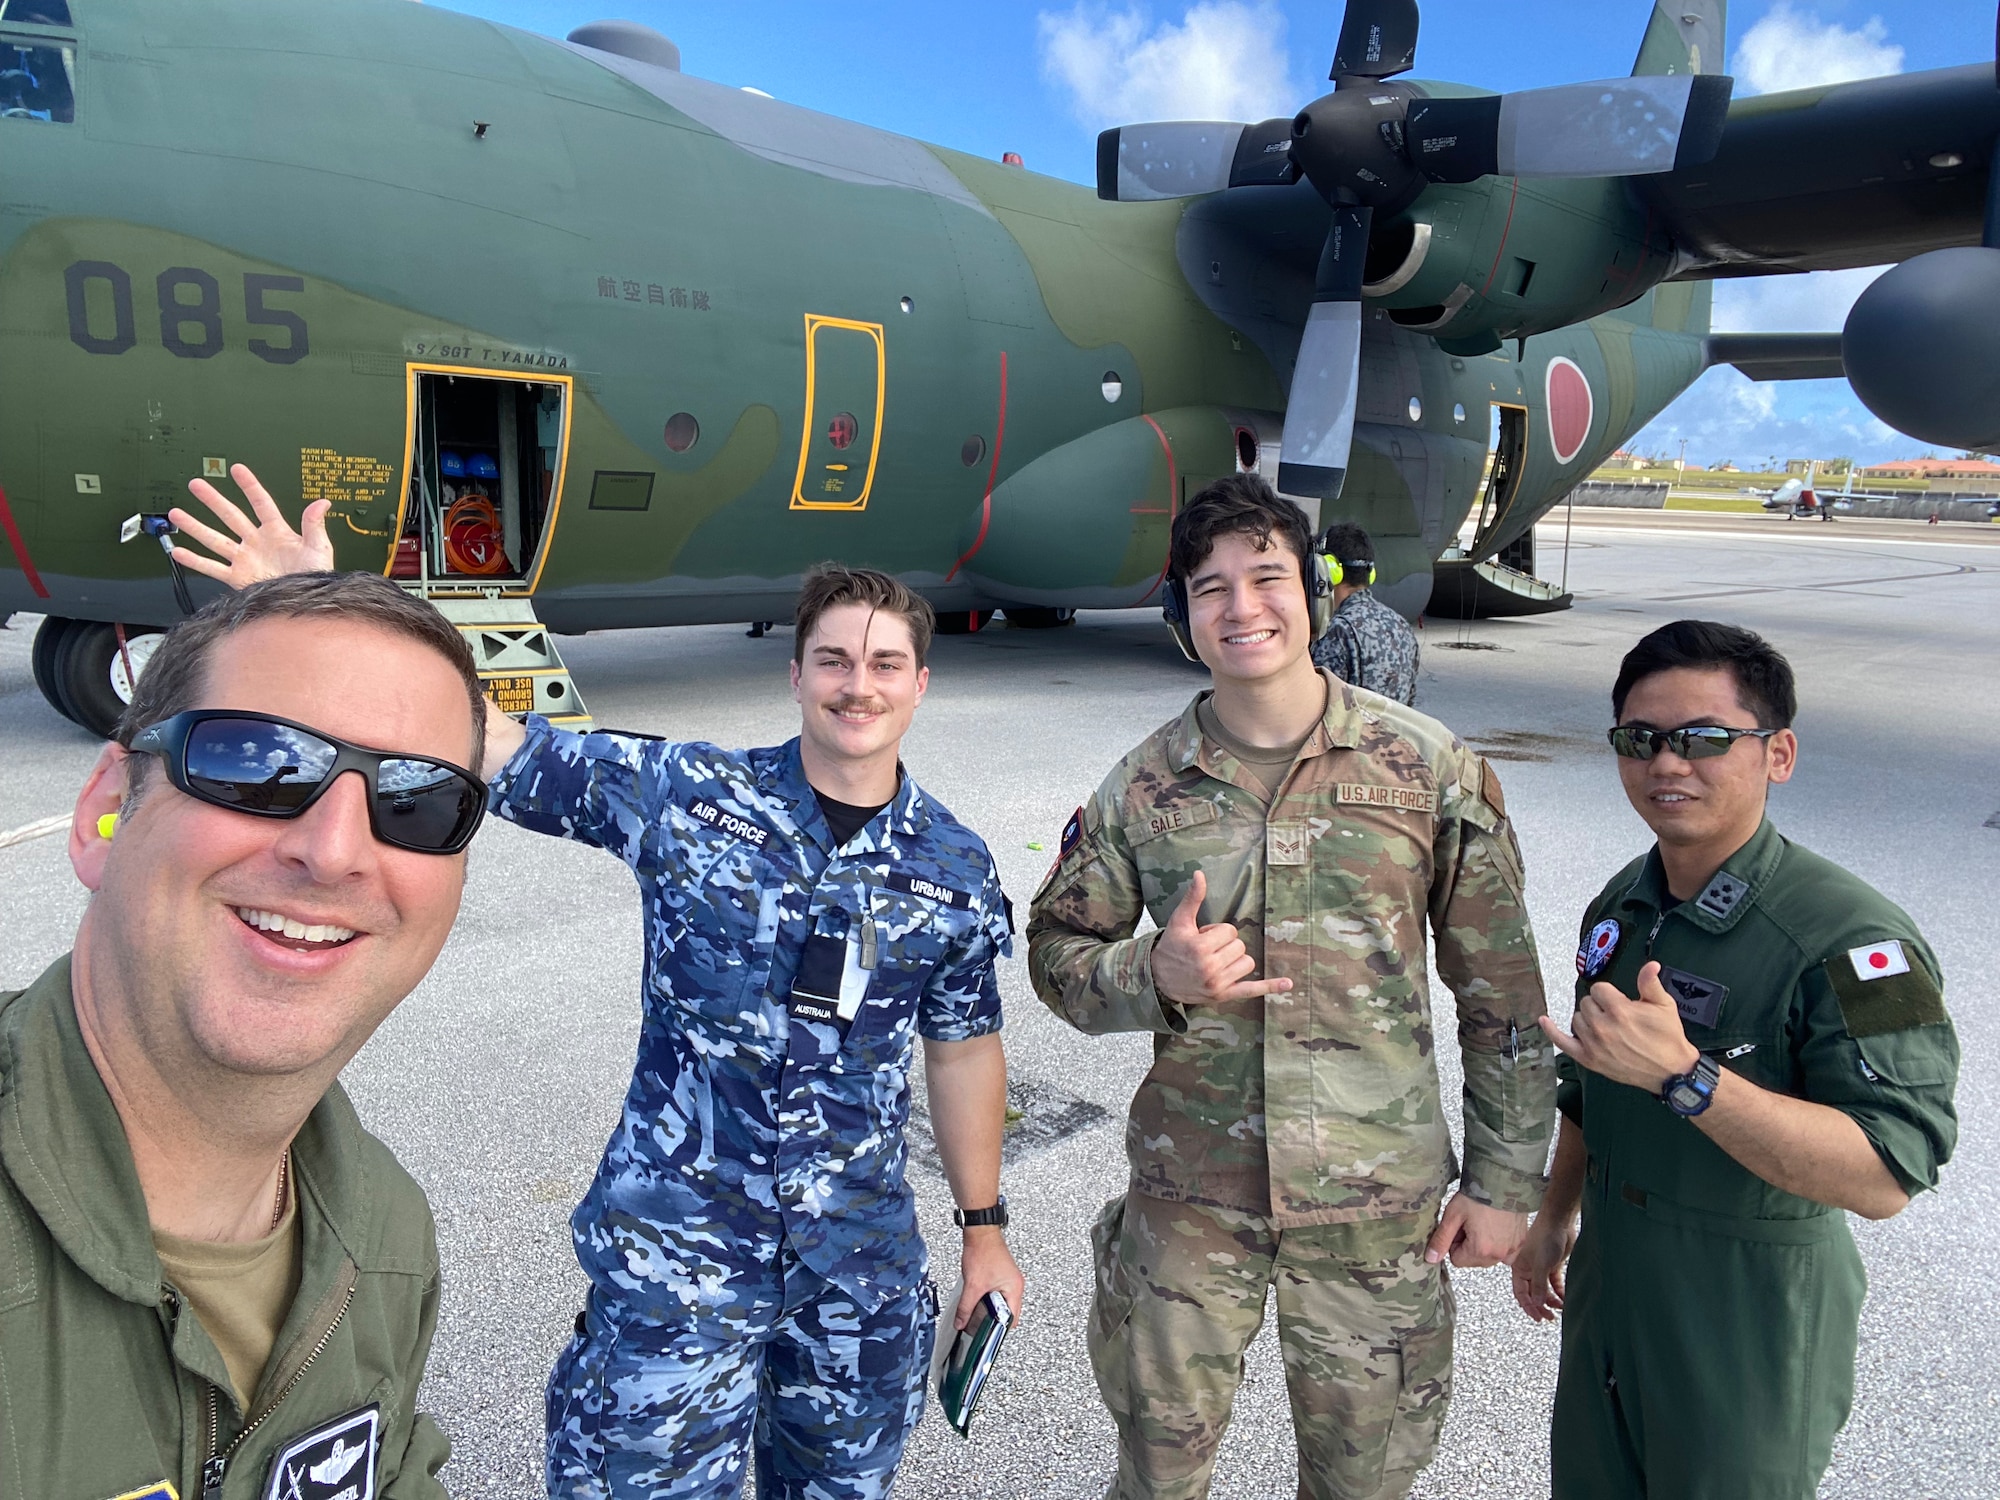 Col. Edward Schierberl, 374th Air Expeditionary Wing commander, and members of the Royal Australian Air Force, U.S Air Force and Japanese Self-Defense Force pose for a photo in February 2024, on the flightline at Andersen Air Force Base, Guam during the Cope North 24 exercise.